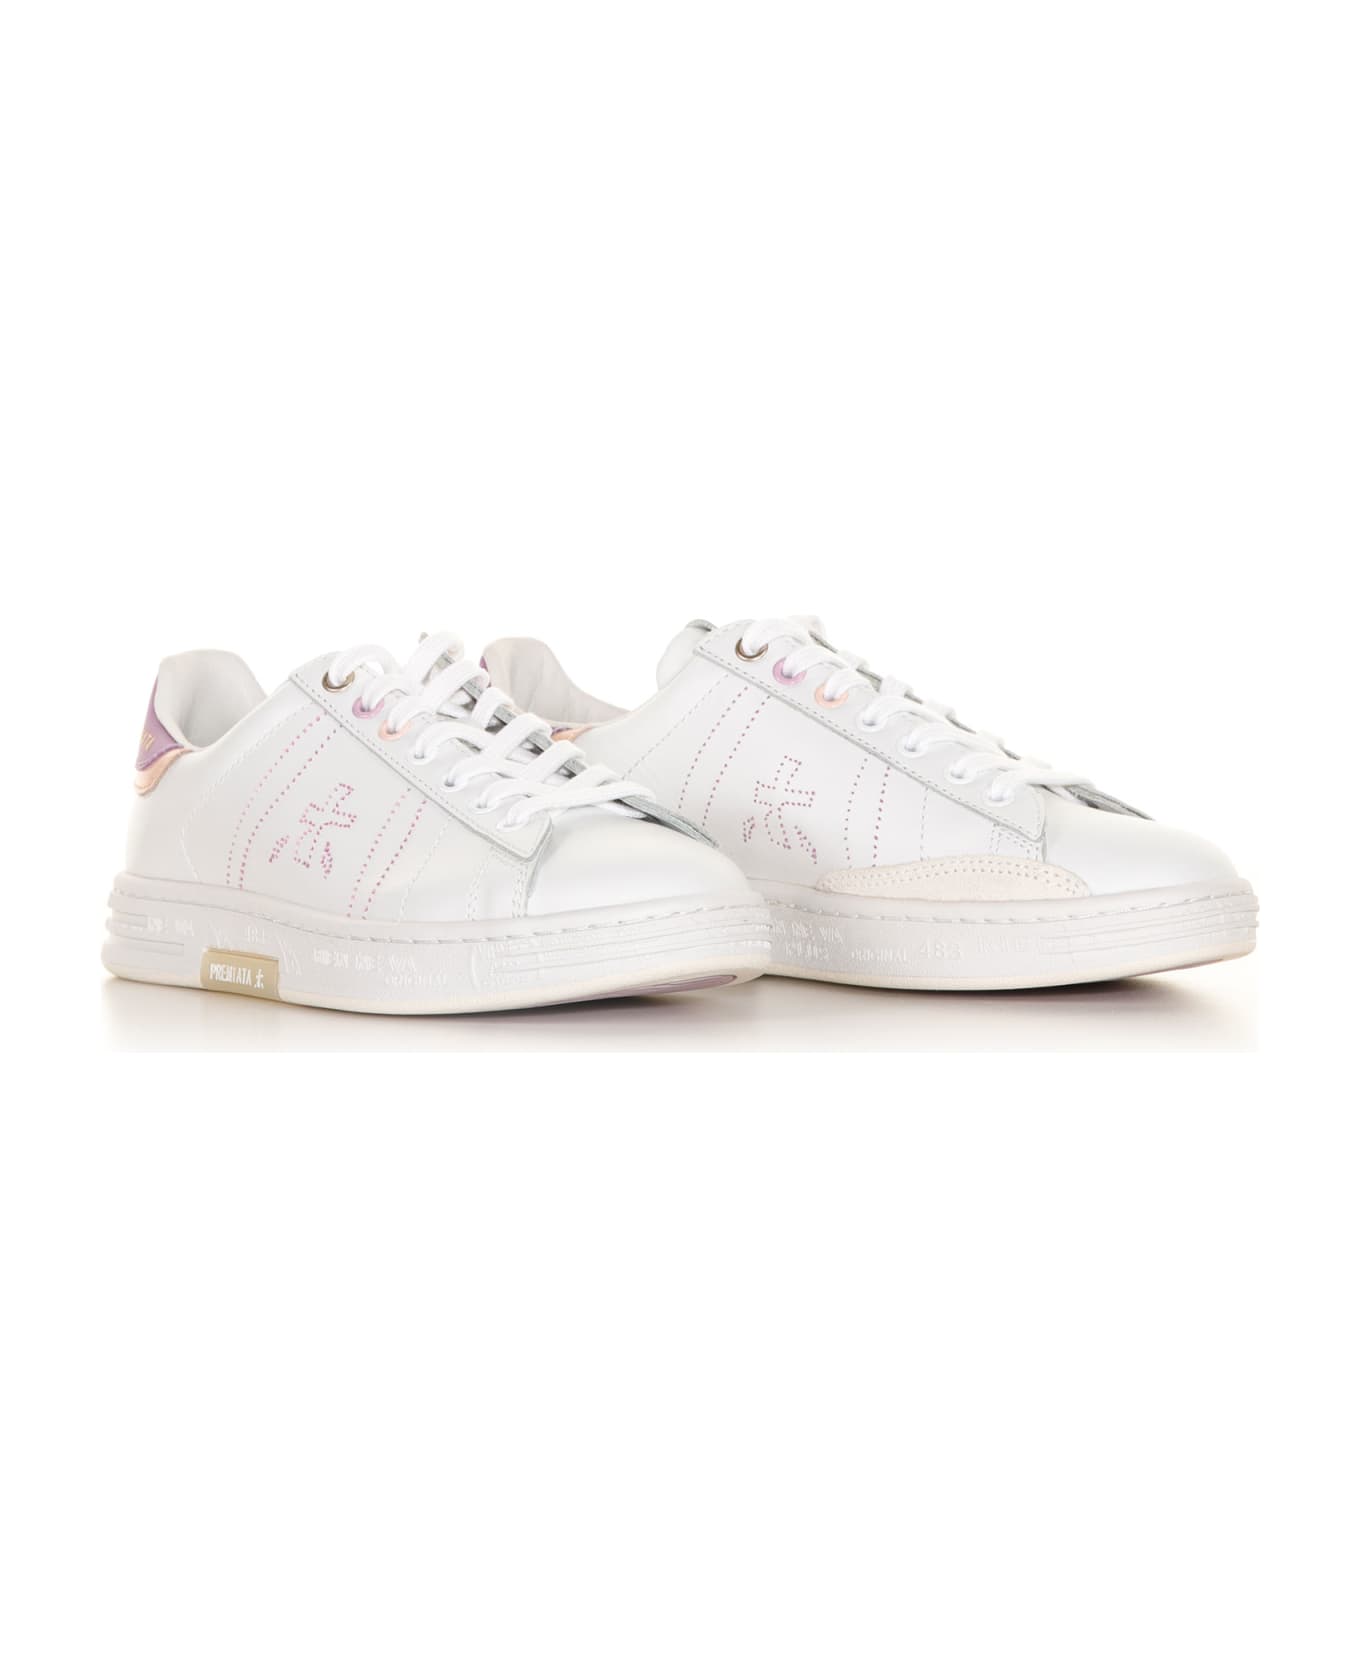 Premiata Russell 6260 Sneaker With Contrasting Heel - BIANCO スニーカー